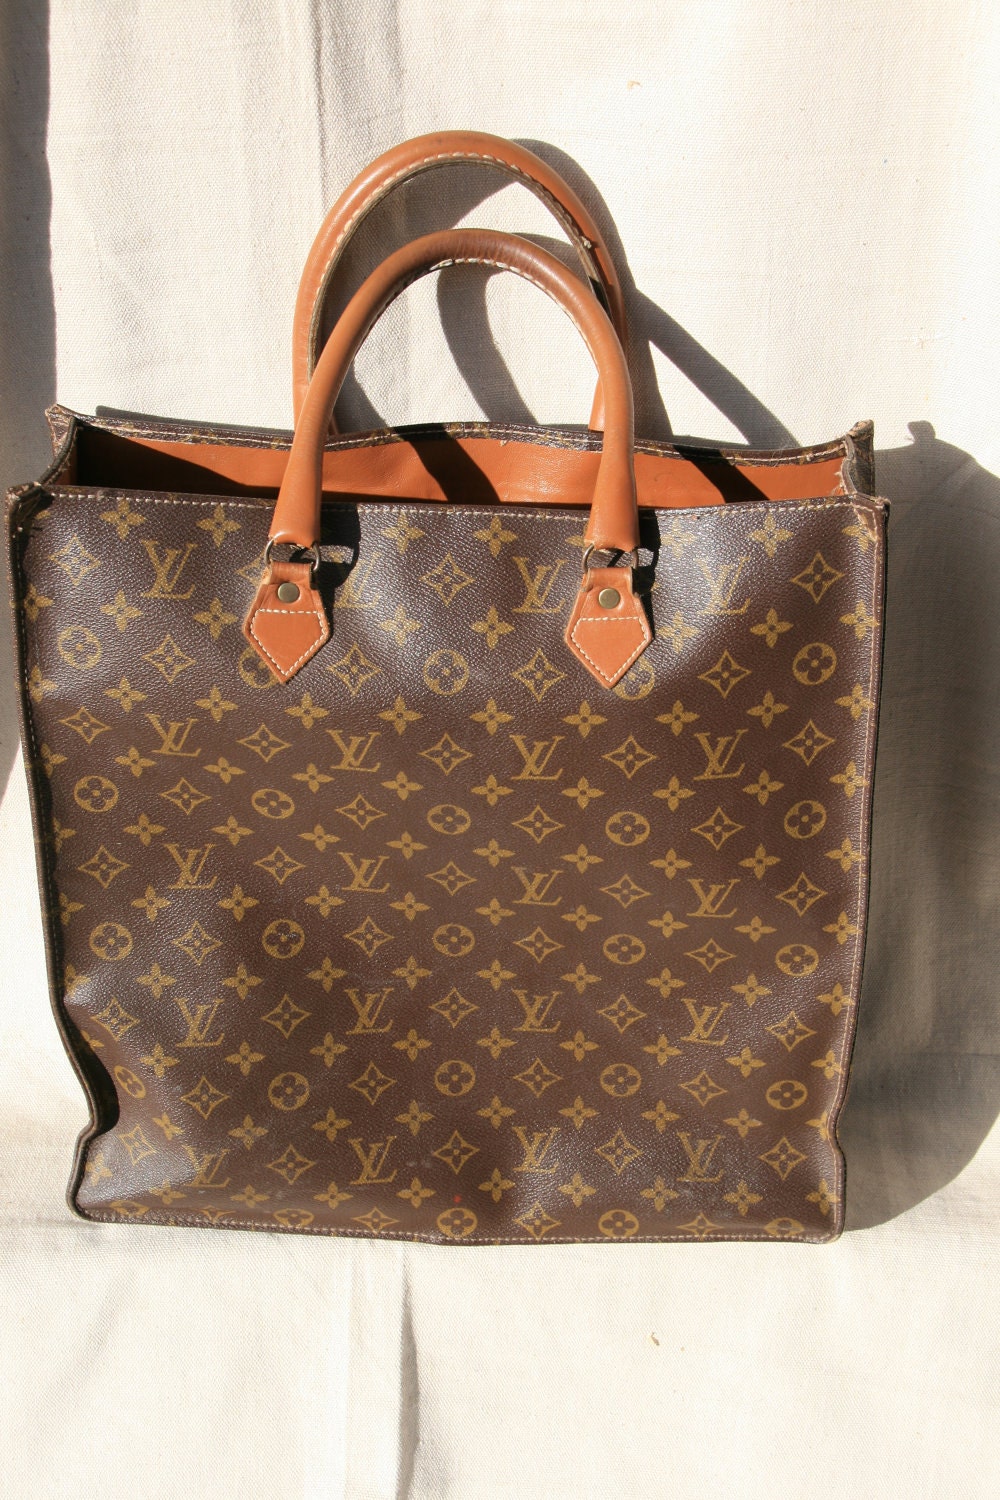 Are Louis Vuitton Bags Made In Usa Or France